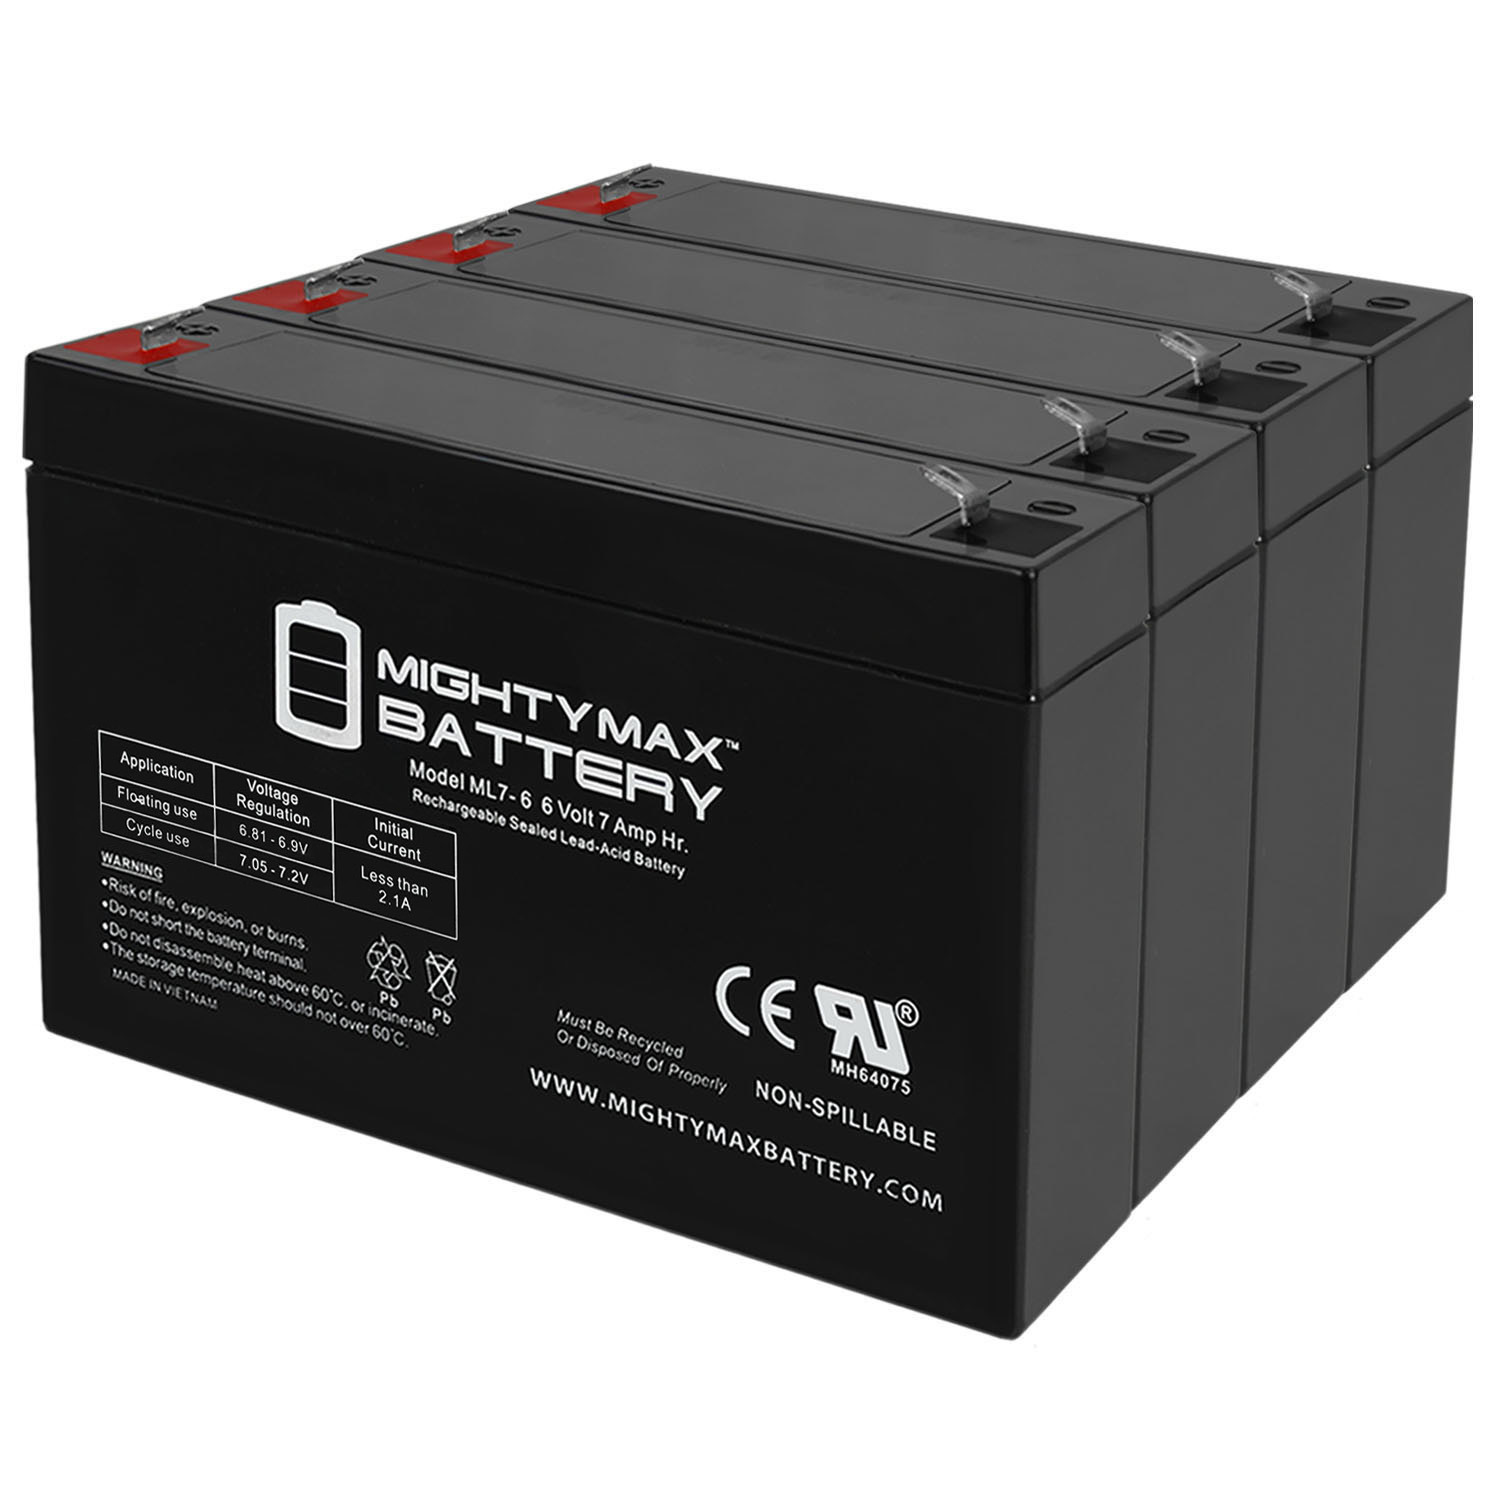 MGE Batteries ES4 Replacement Battery 6V 7Ah - 4 Pack